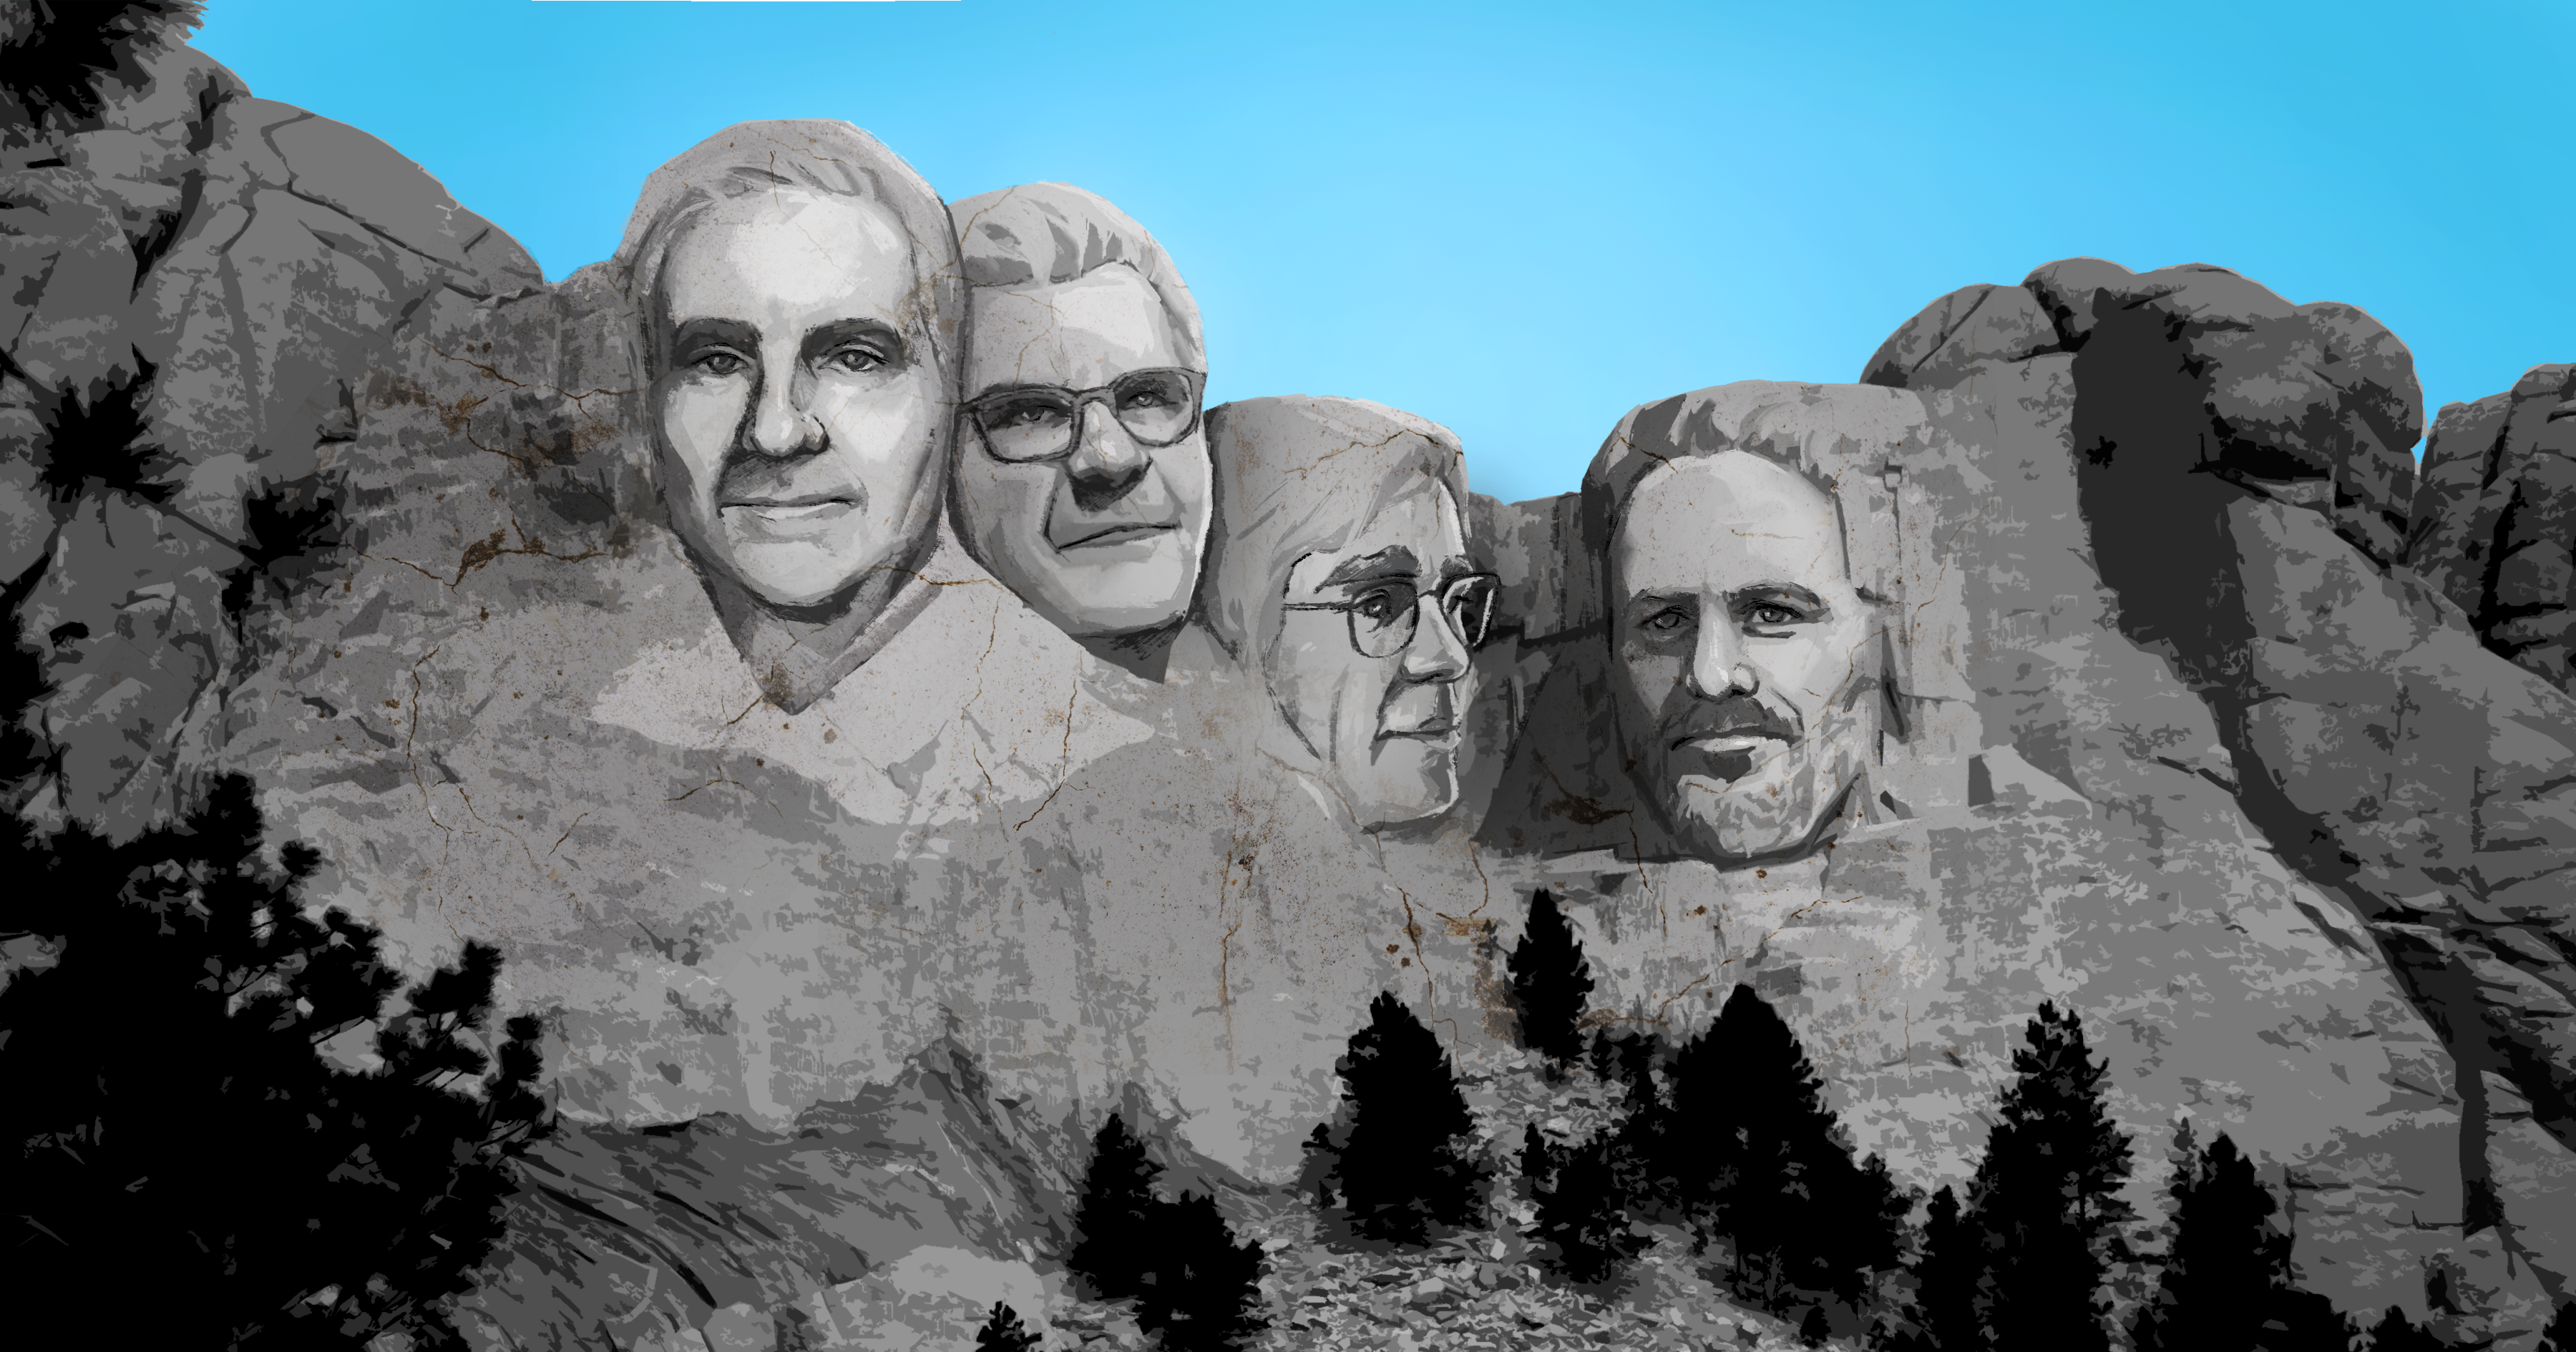 Founding fathers of open innovation